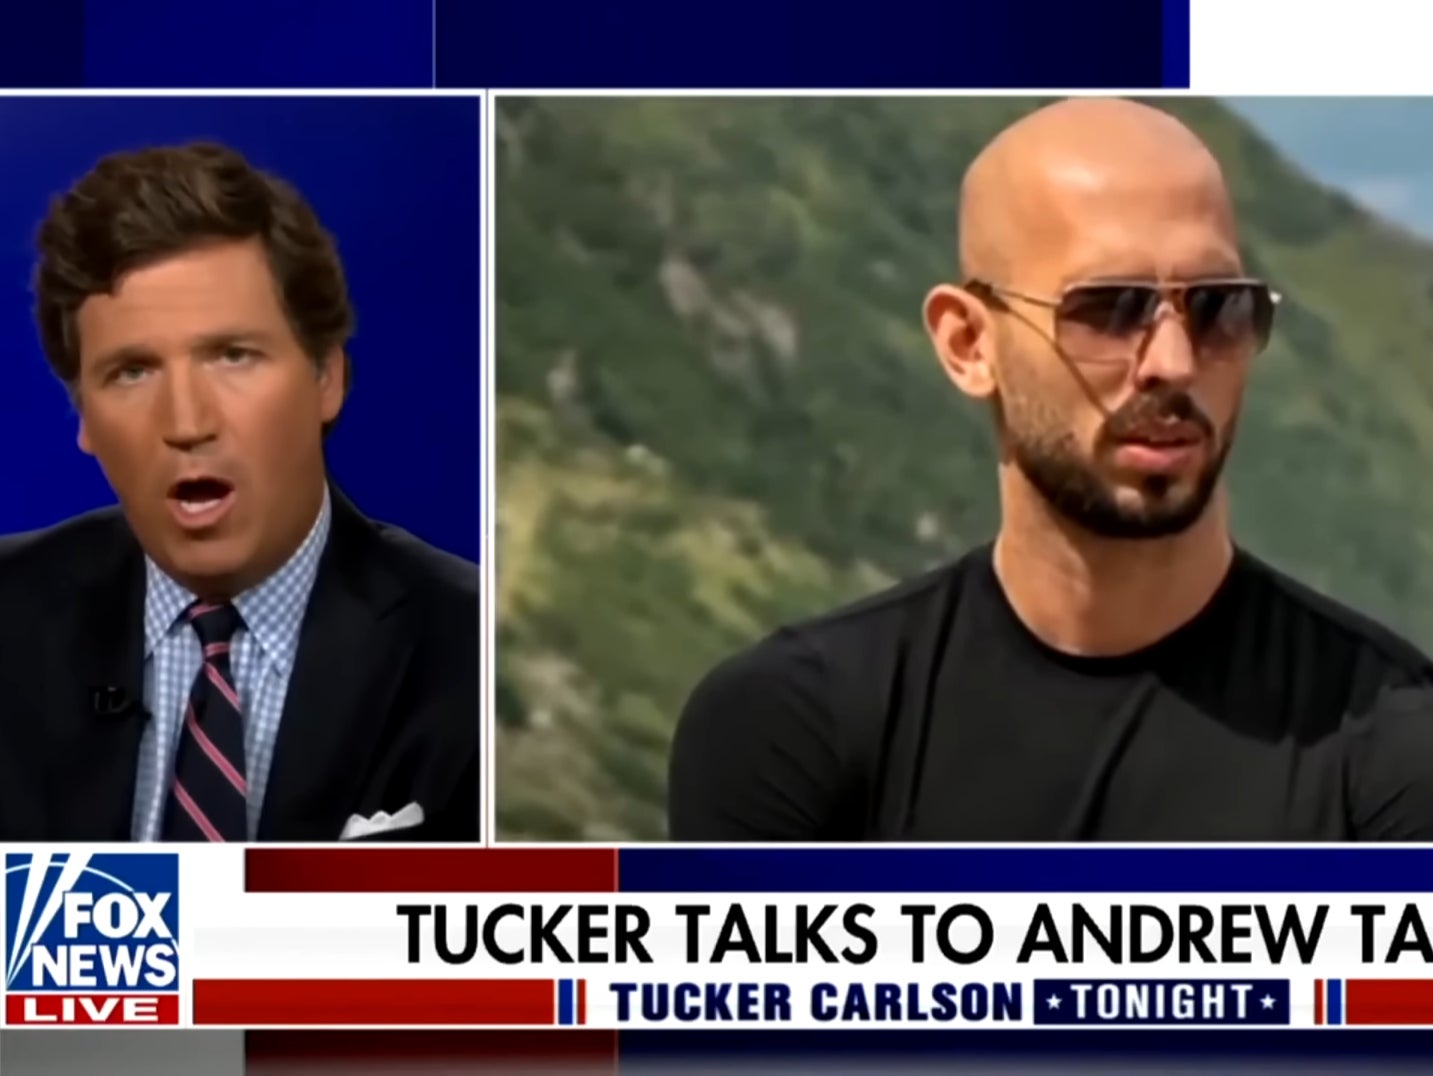 Tucker Carlson introduces an interview with Andrew Tate on 25 August 2022